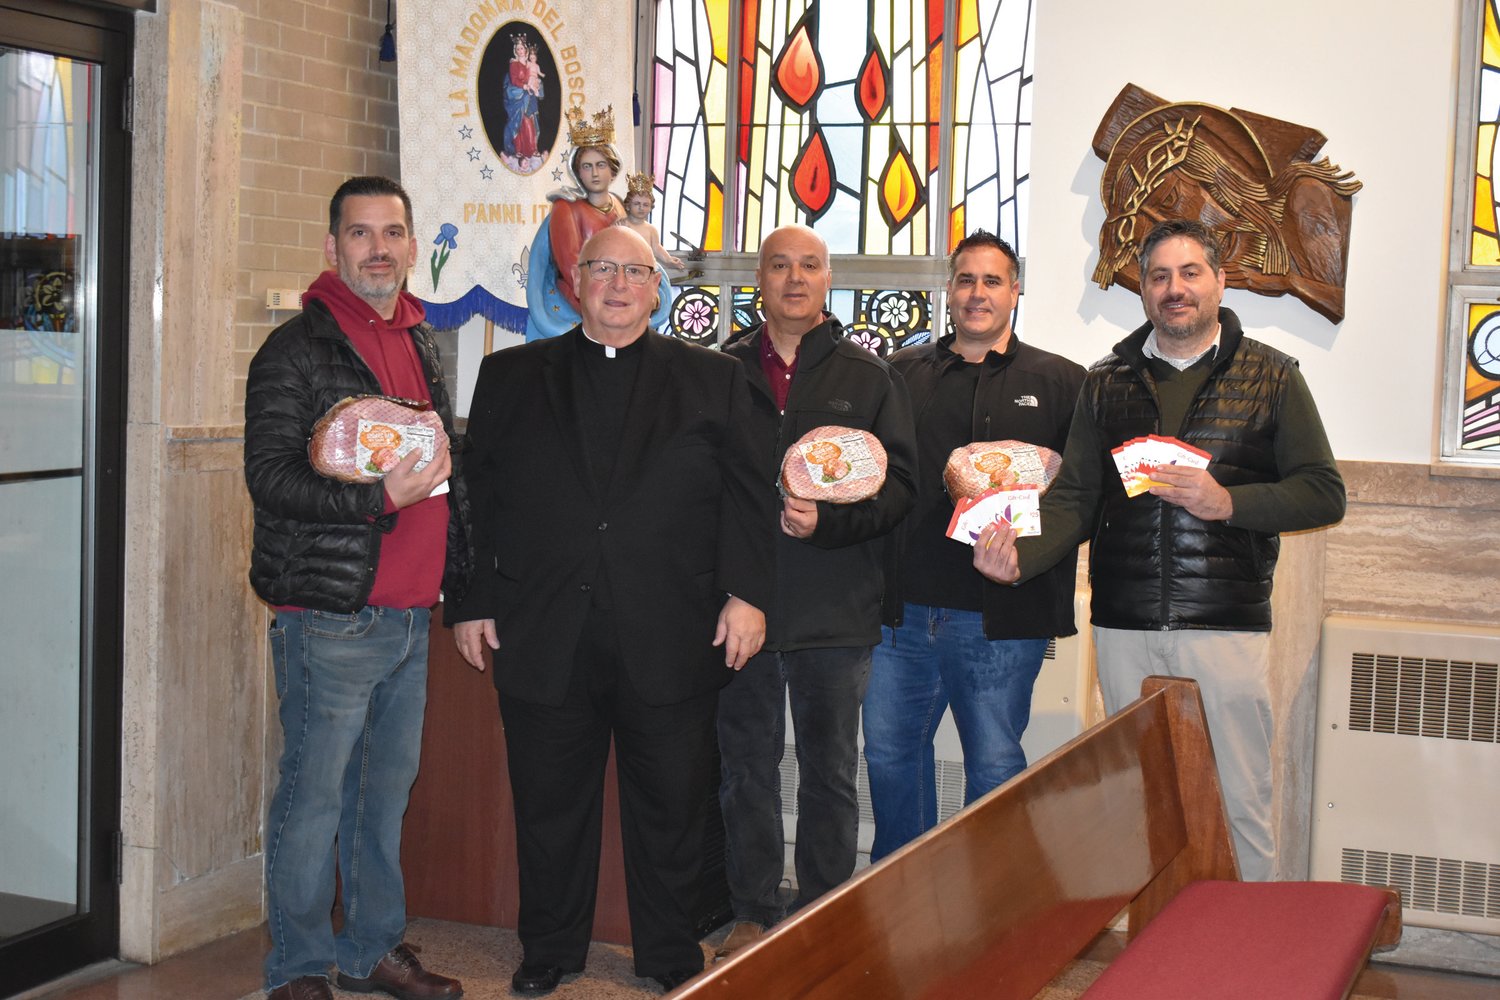 PROUD PANNESE PE0PLE: Rev. Peter J. Gower (second left), popular pastor at Our lady of Grace Church, is joined by President David Venditelli (left), Secretary Louis Mansolillo, Vice President Jason Parenteau and Treasurer Stephen Russo during the recent spiral ham donation  in Johnston.